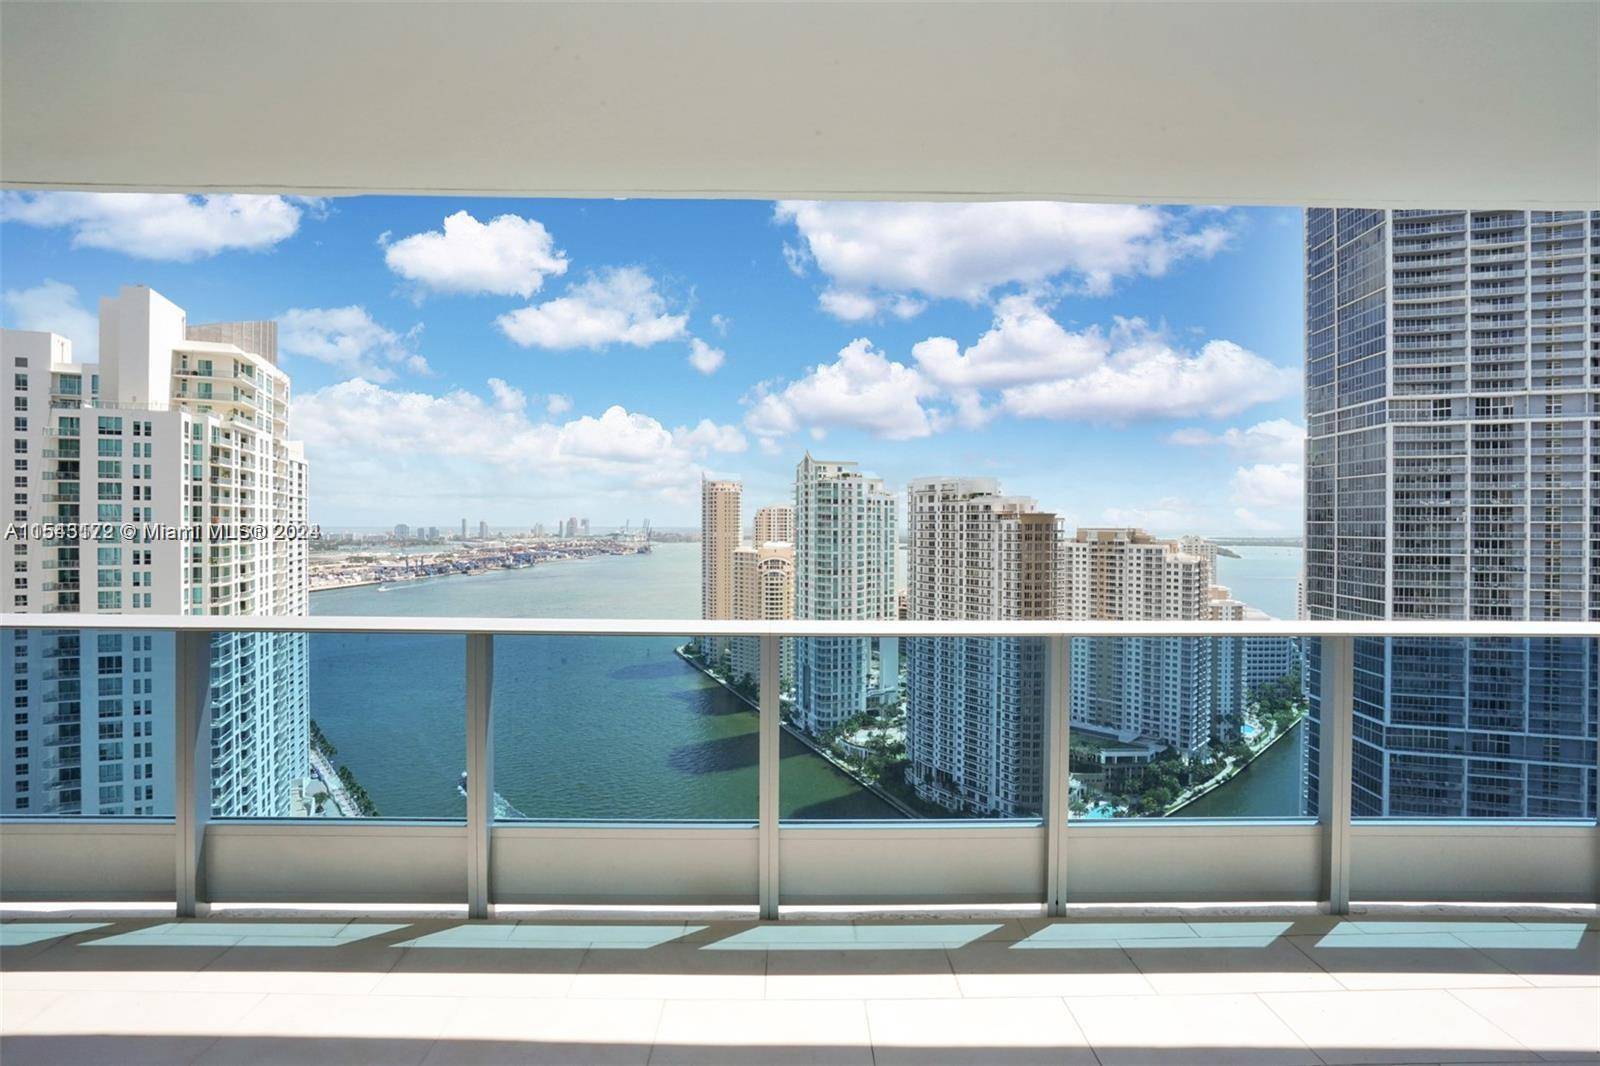 Desirable Epic Residences in the heart of Downtown Miami, the most urban and pedestrian friendly neighborhood in Miami.